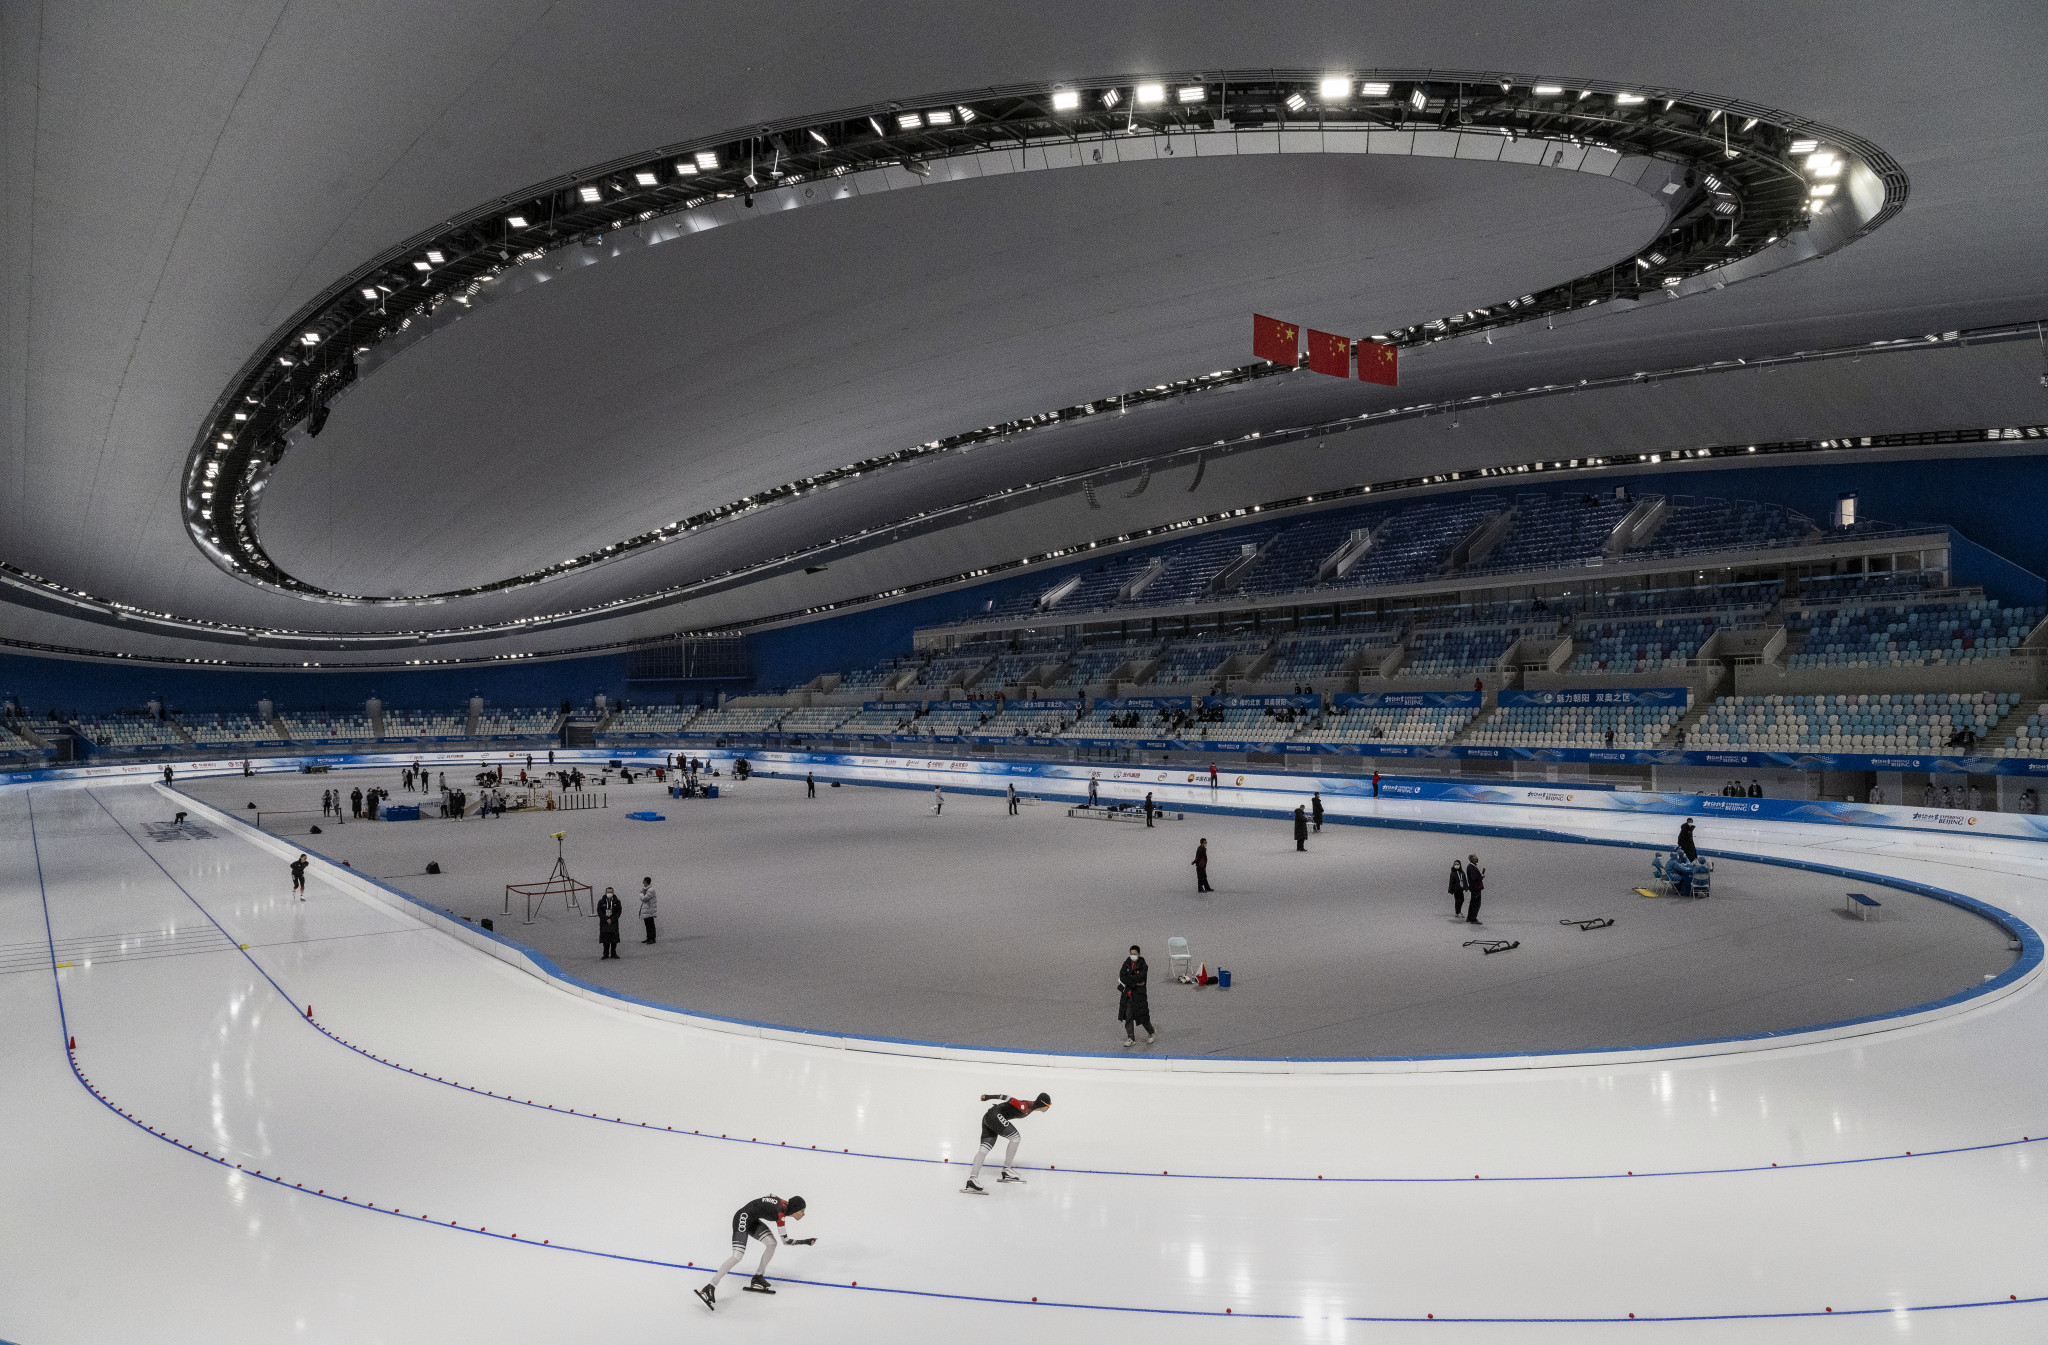 The Beijing 2022 Winter Olympics will not take place before a backdrop of empty stands, organisers have said ©Getty Images